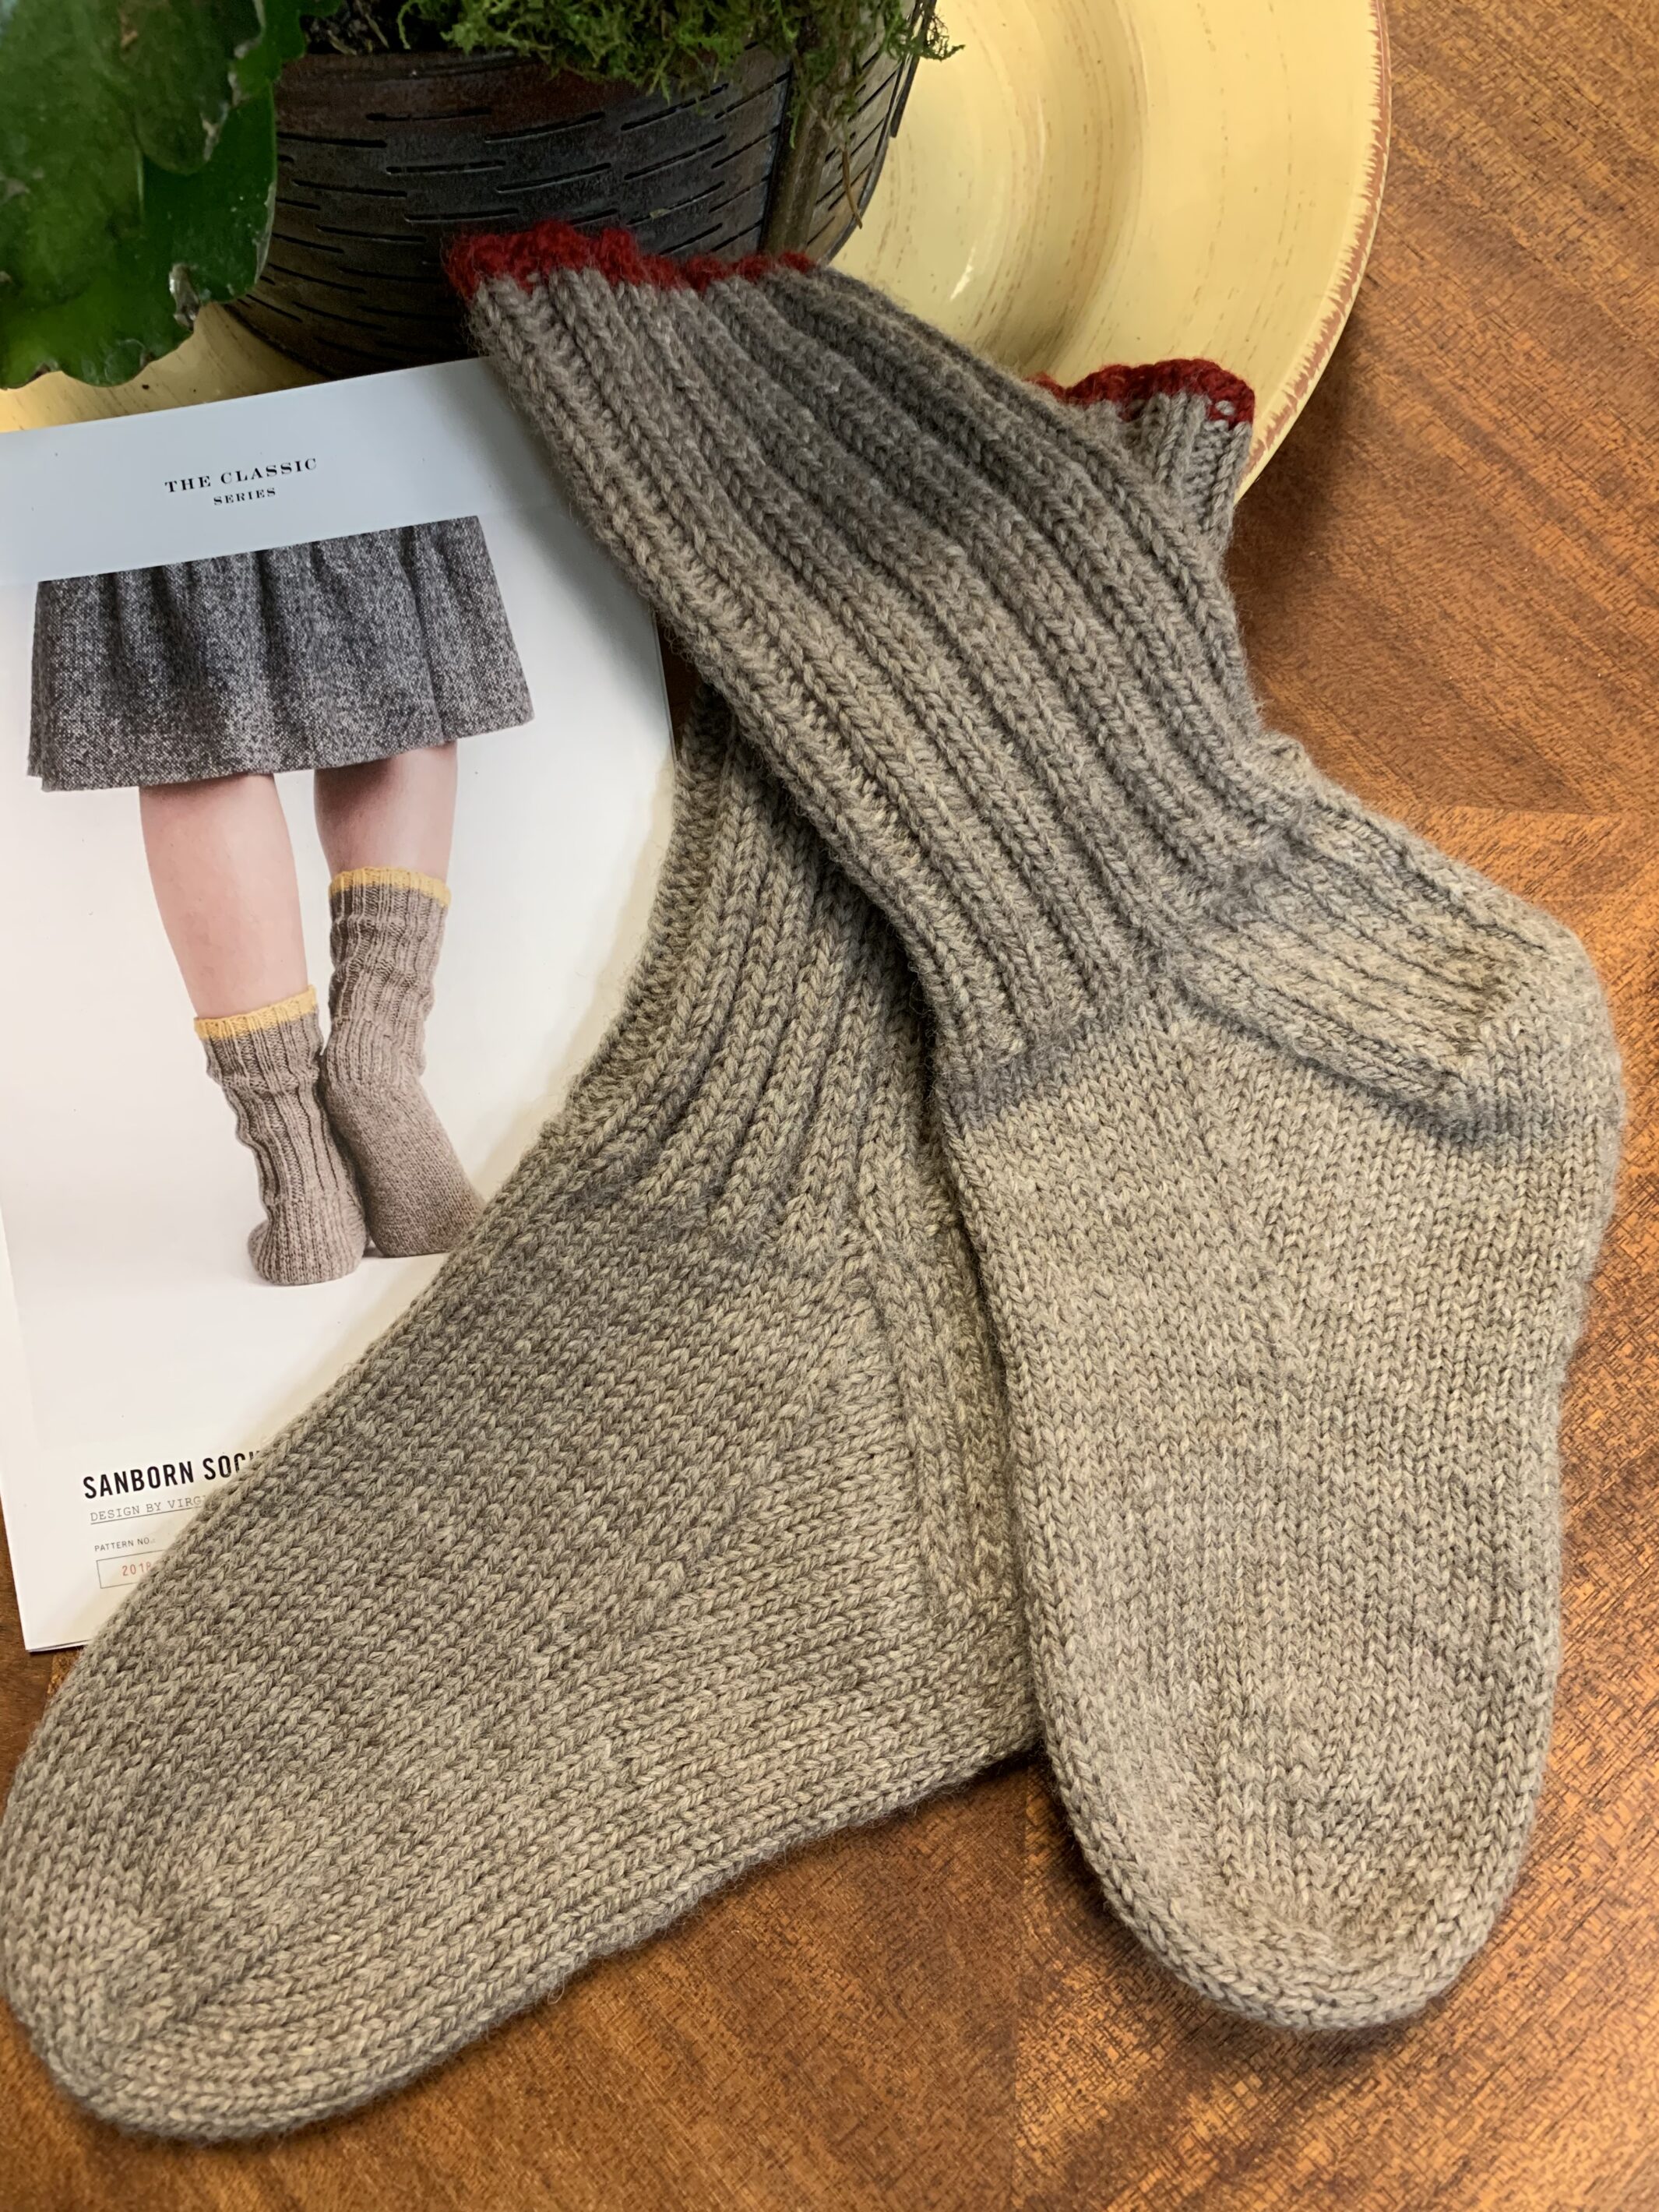 knitted worsted weight sock